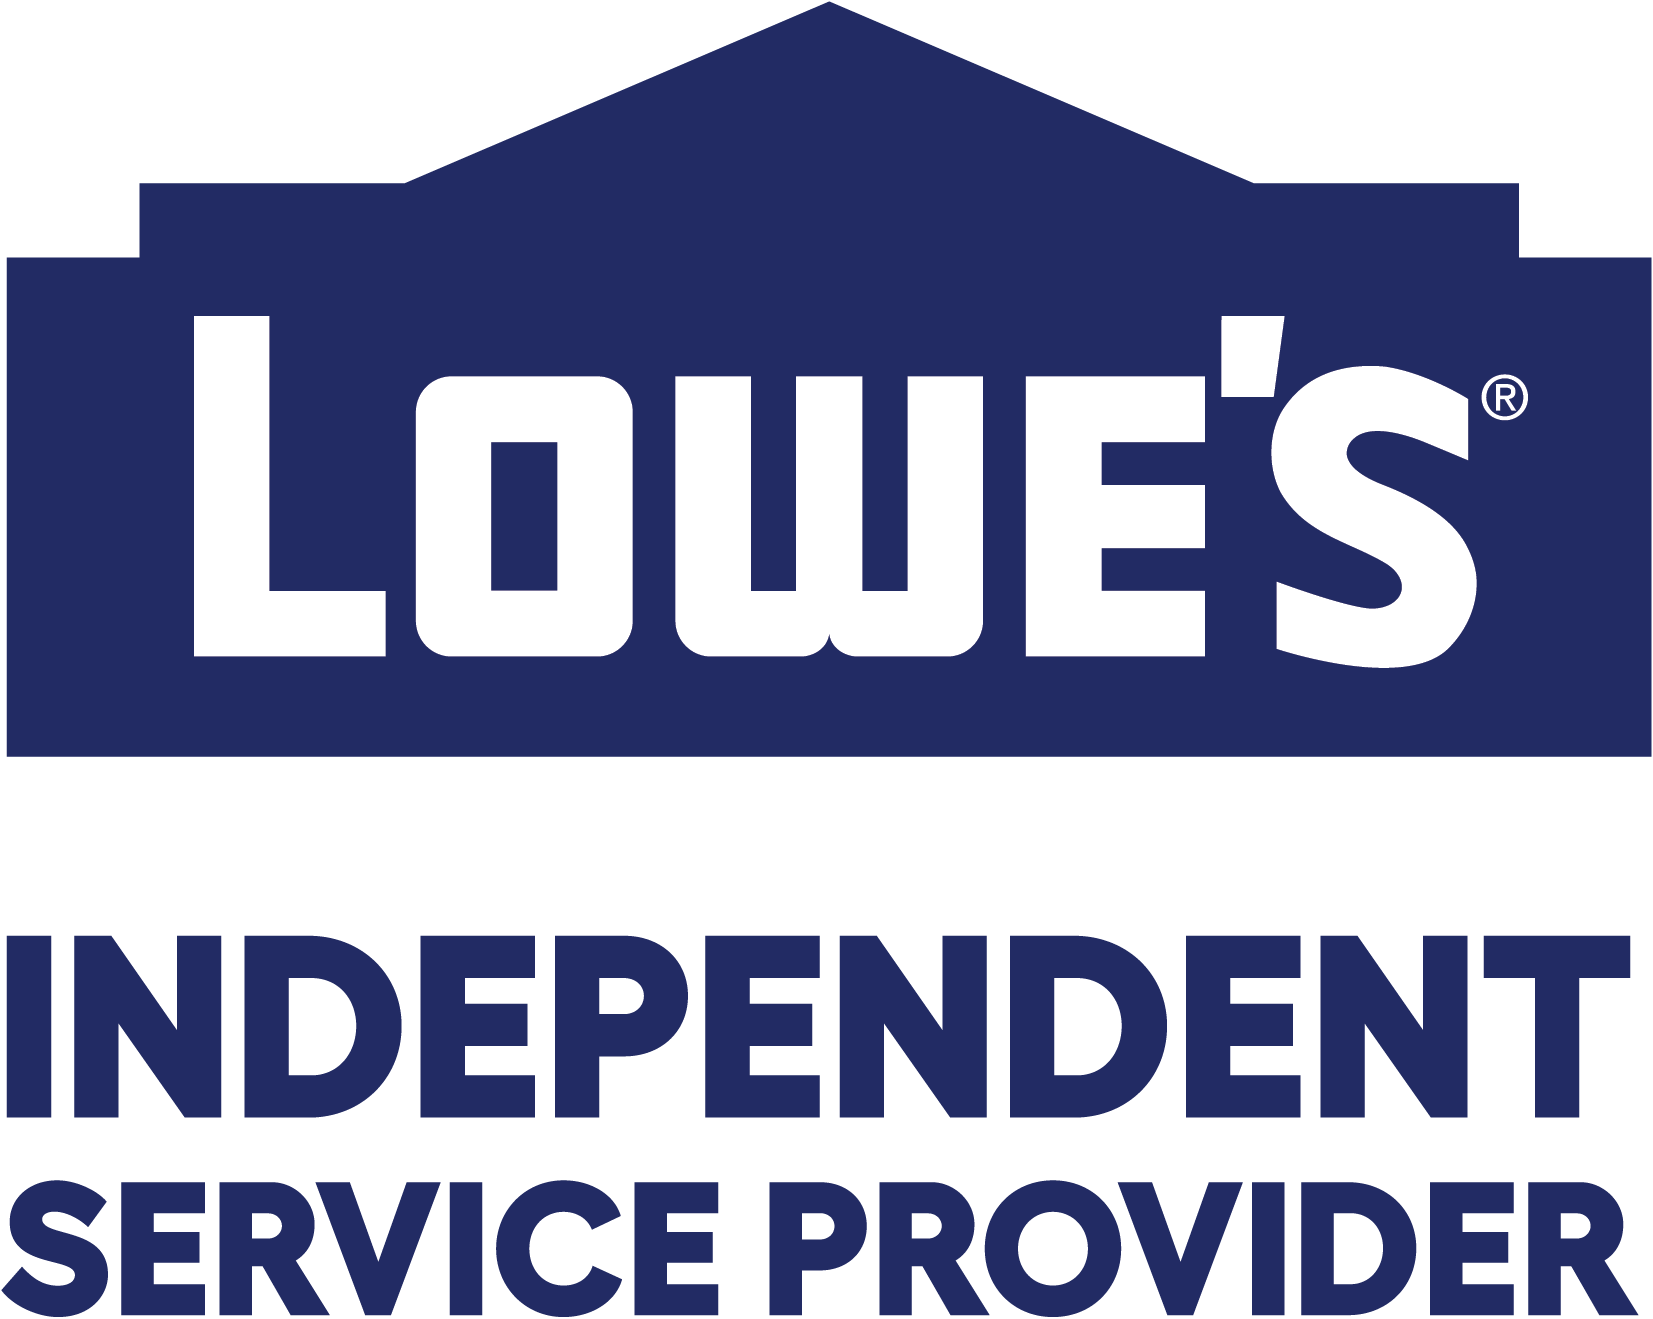 Lowes Logo PNG Photos